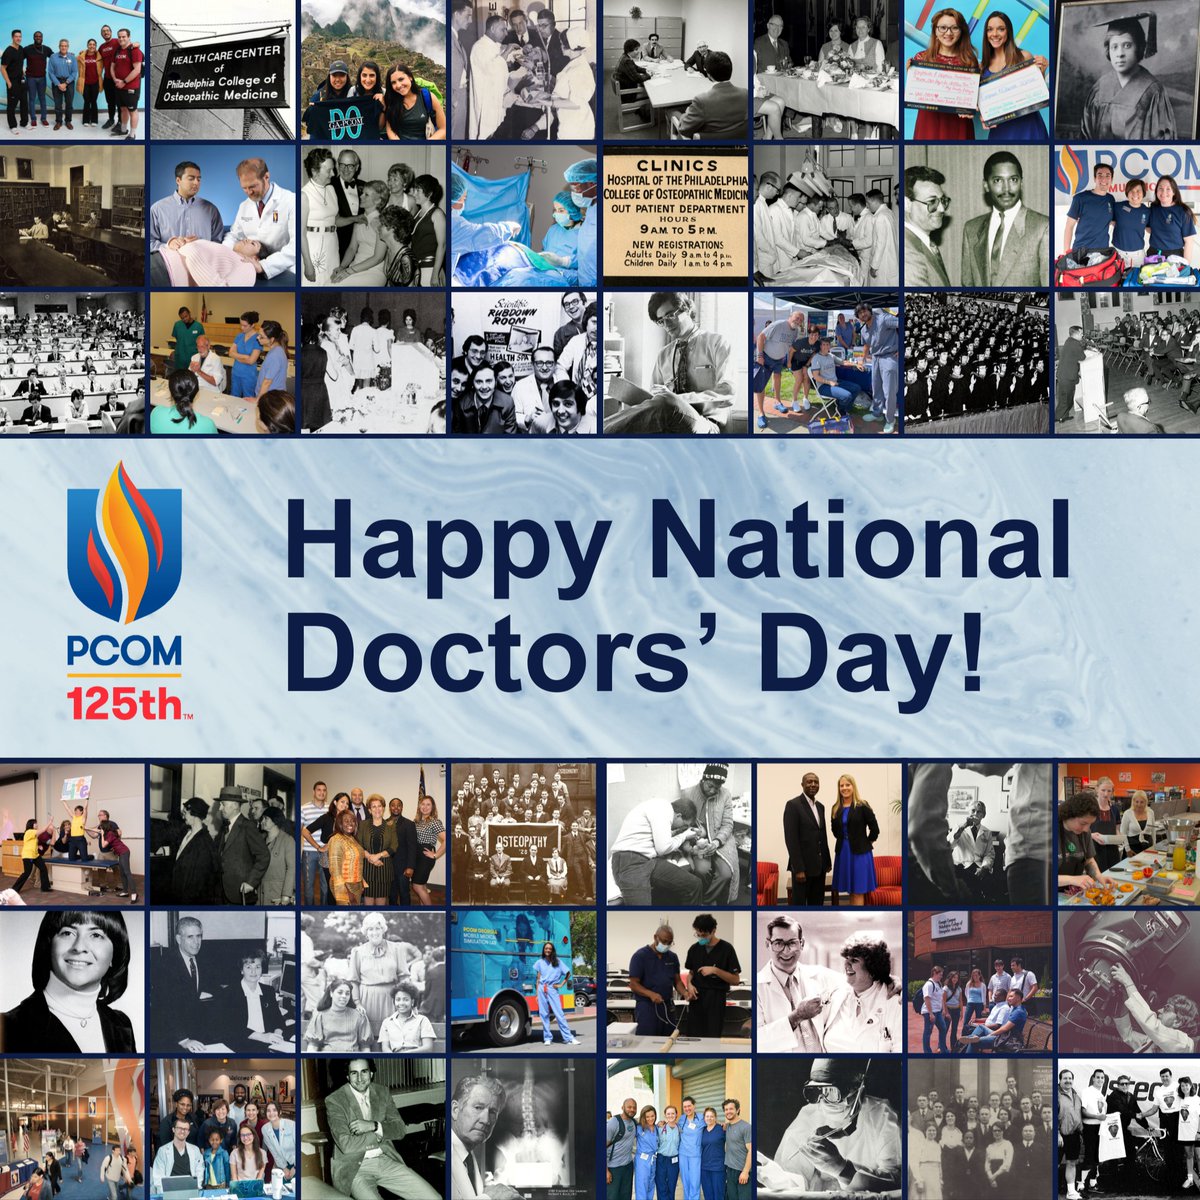 PCOM’s 125-year legacy is built on the doctors who educate and care for our communities. Thank you for your hard work and dedication to medicine. Happy National Doctors' Day to all physicians and future physicians out there! 

#NationalDoctorsDay #PCOM125